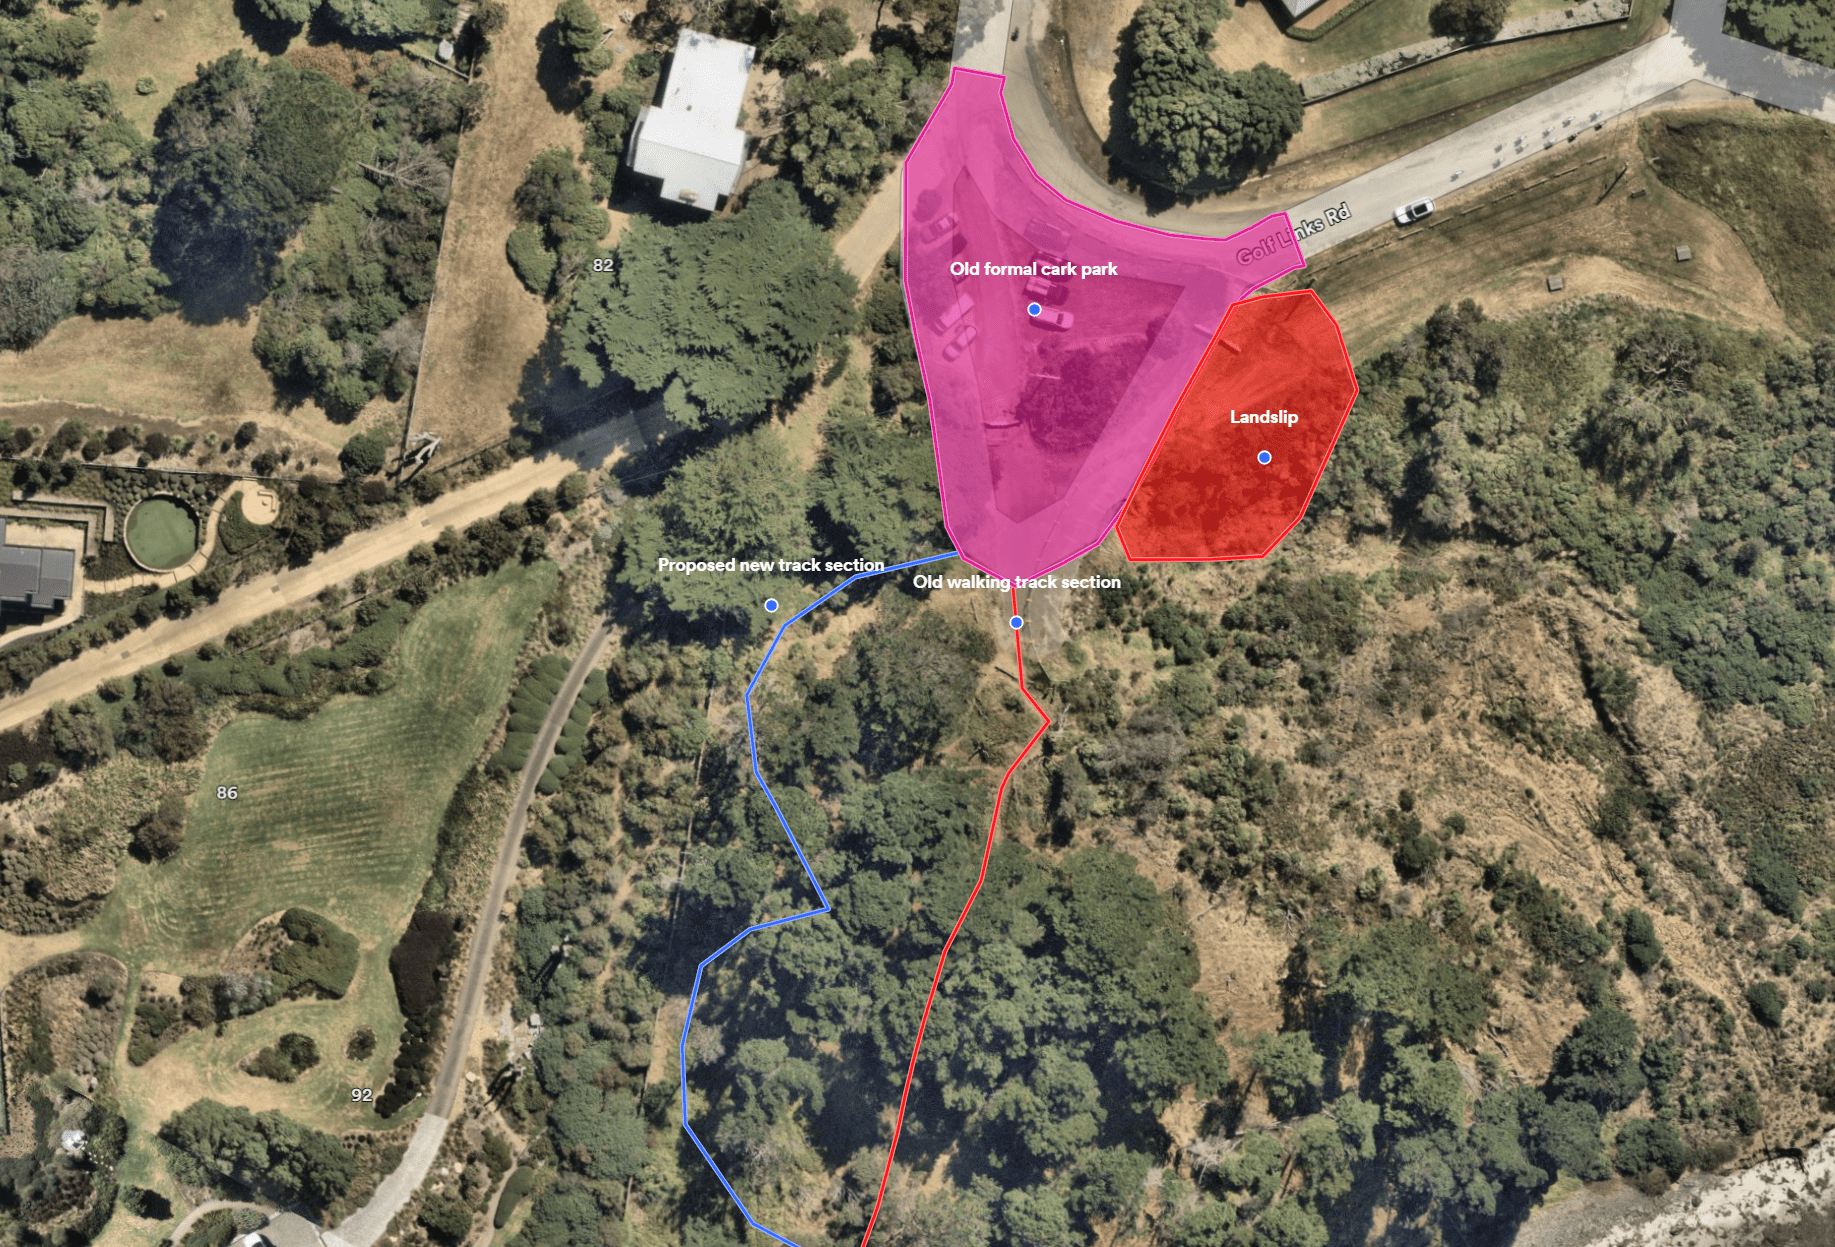 Image shows the old formal car park to the north of the site. Beside it to the east is the landslip zone - where land collapsed after a serious weather event in 2020. Below to the south is the old walking track. Slightly to the west of the old walking track is the proposed new track section that leads to the beach.